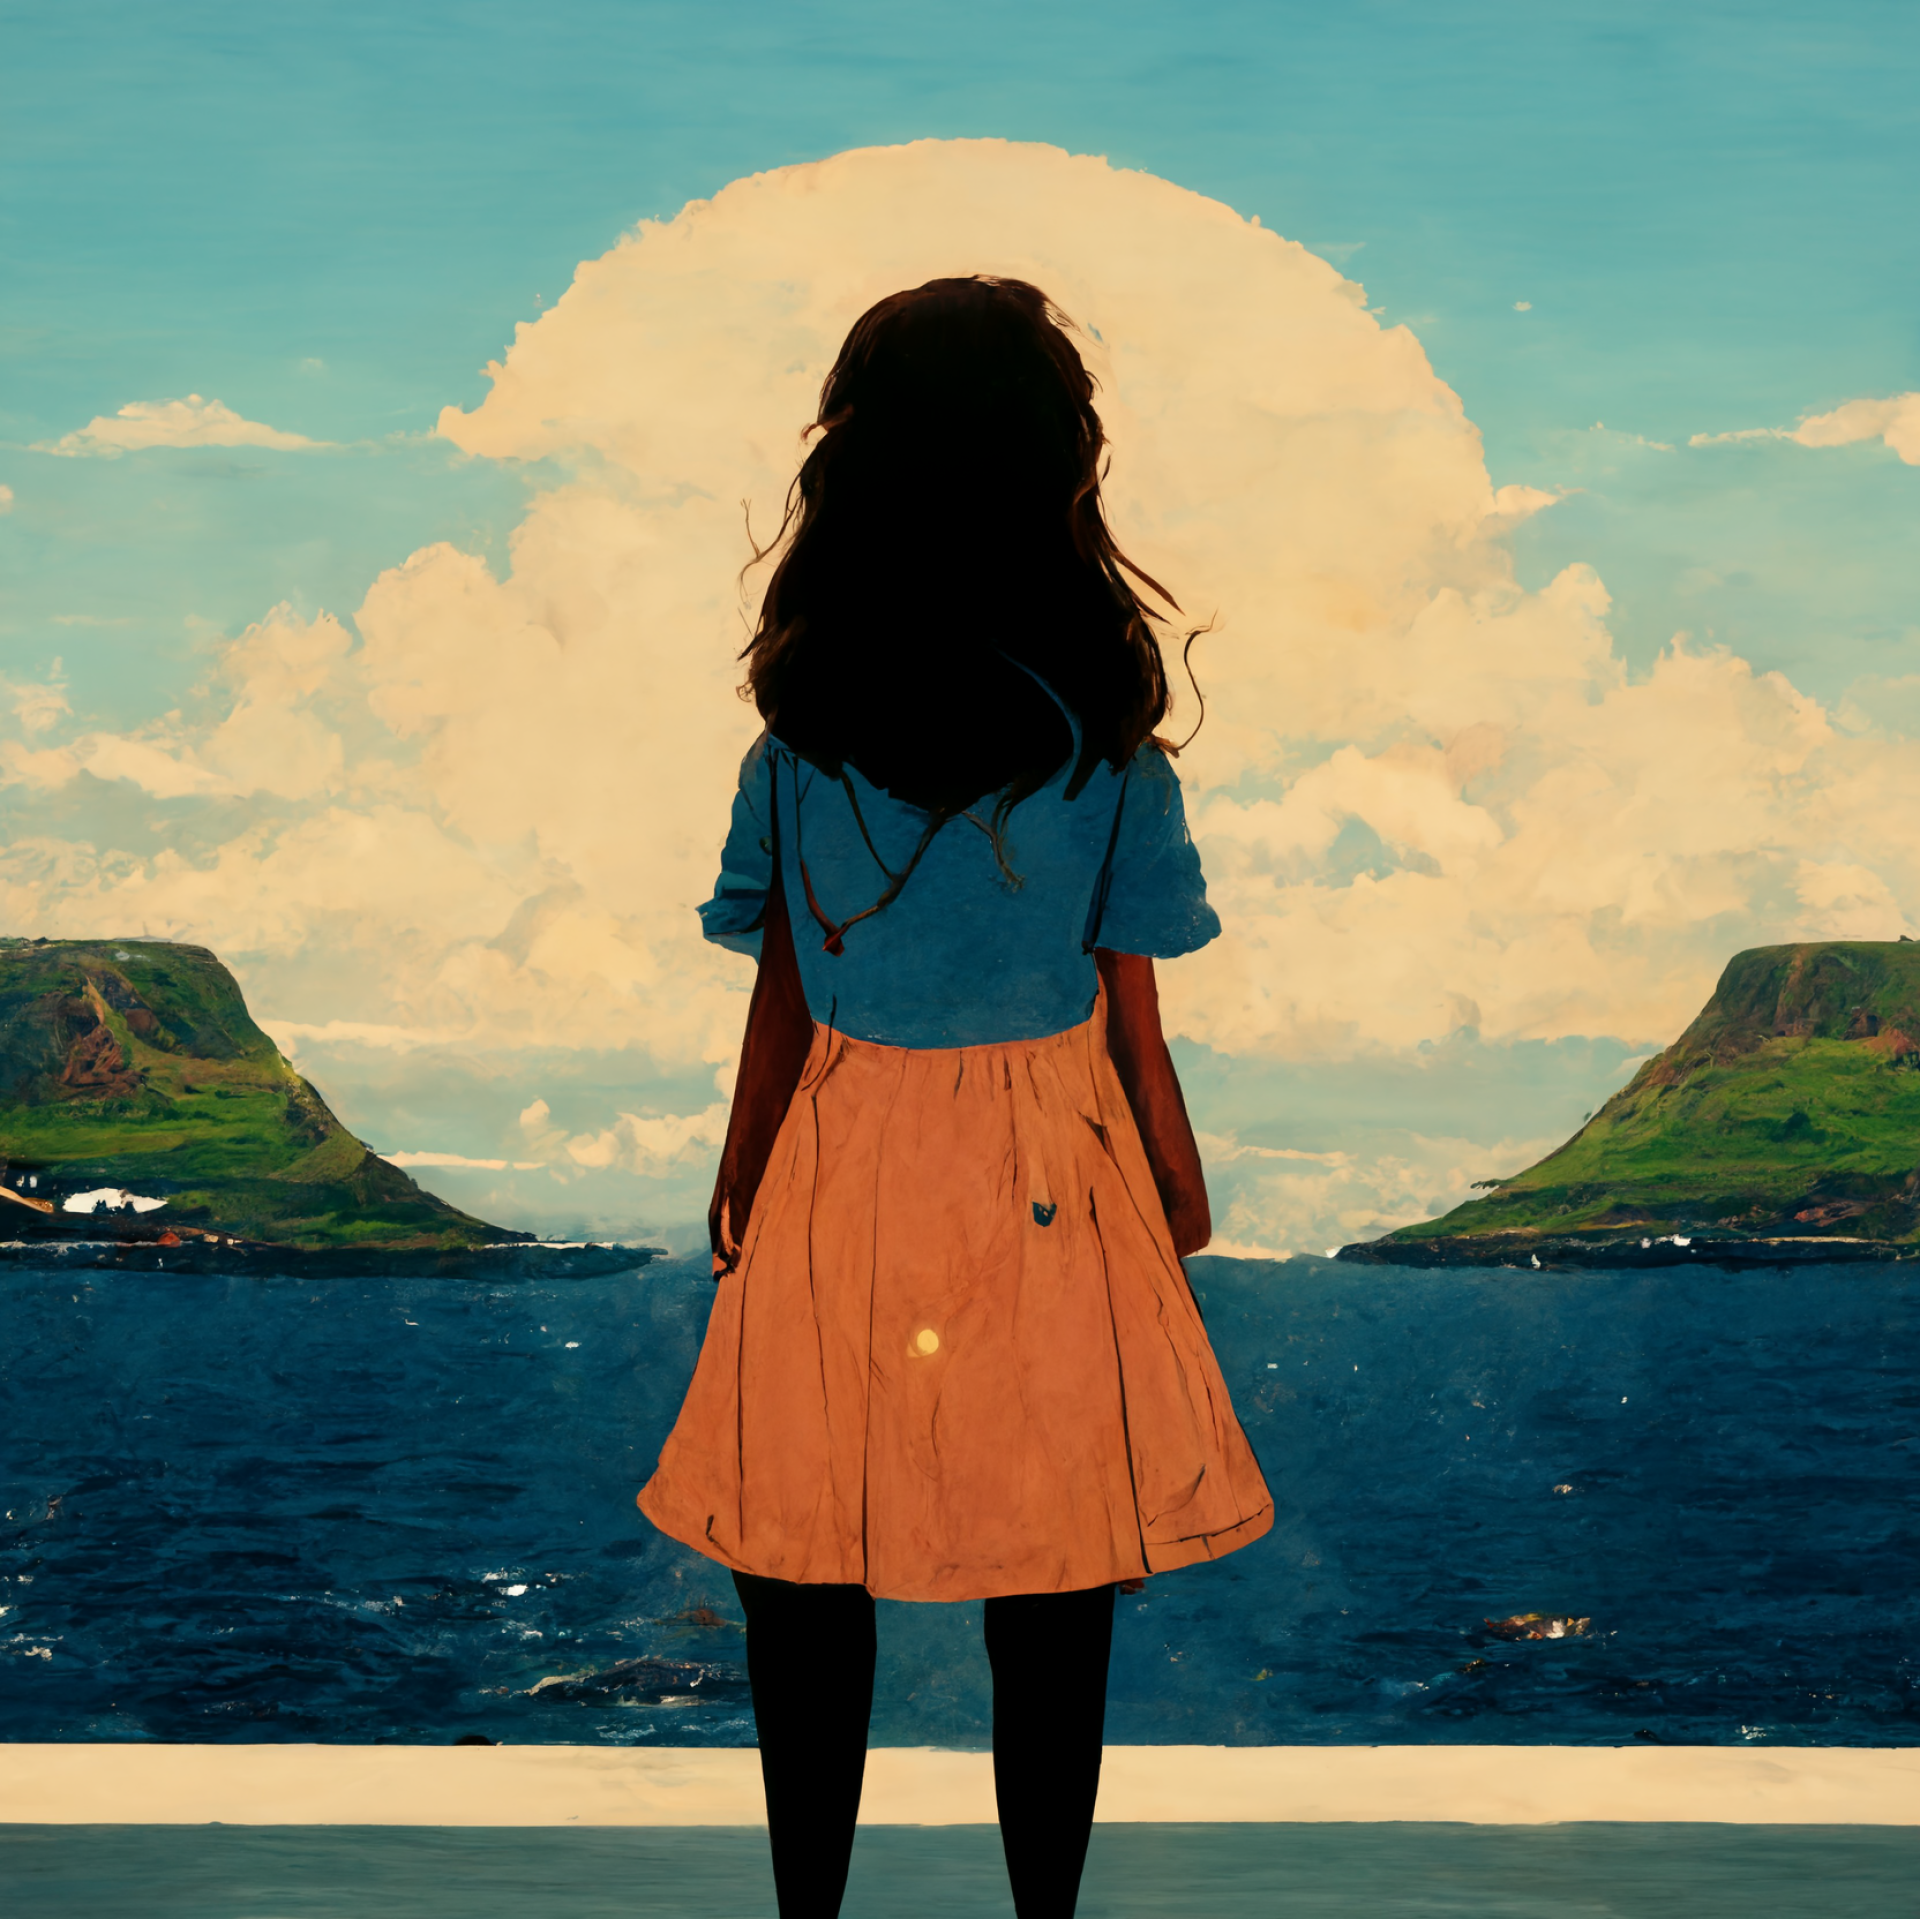 AI-generated image from Midjourney, the Faroe Islands inspired by Ghibli.